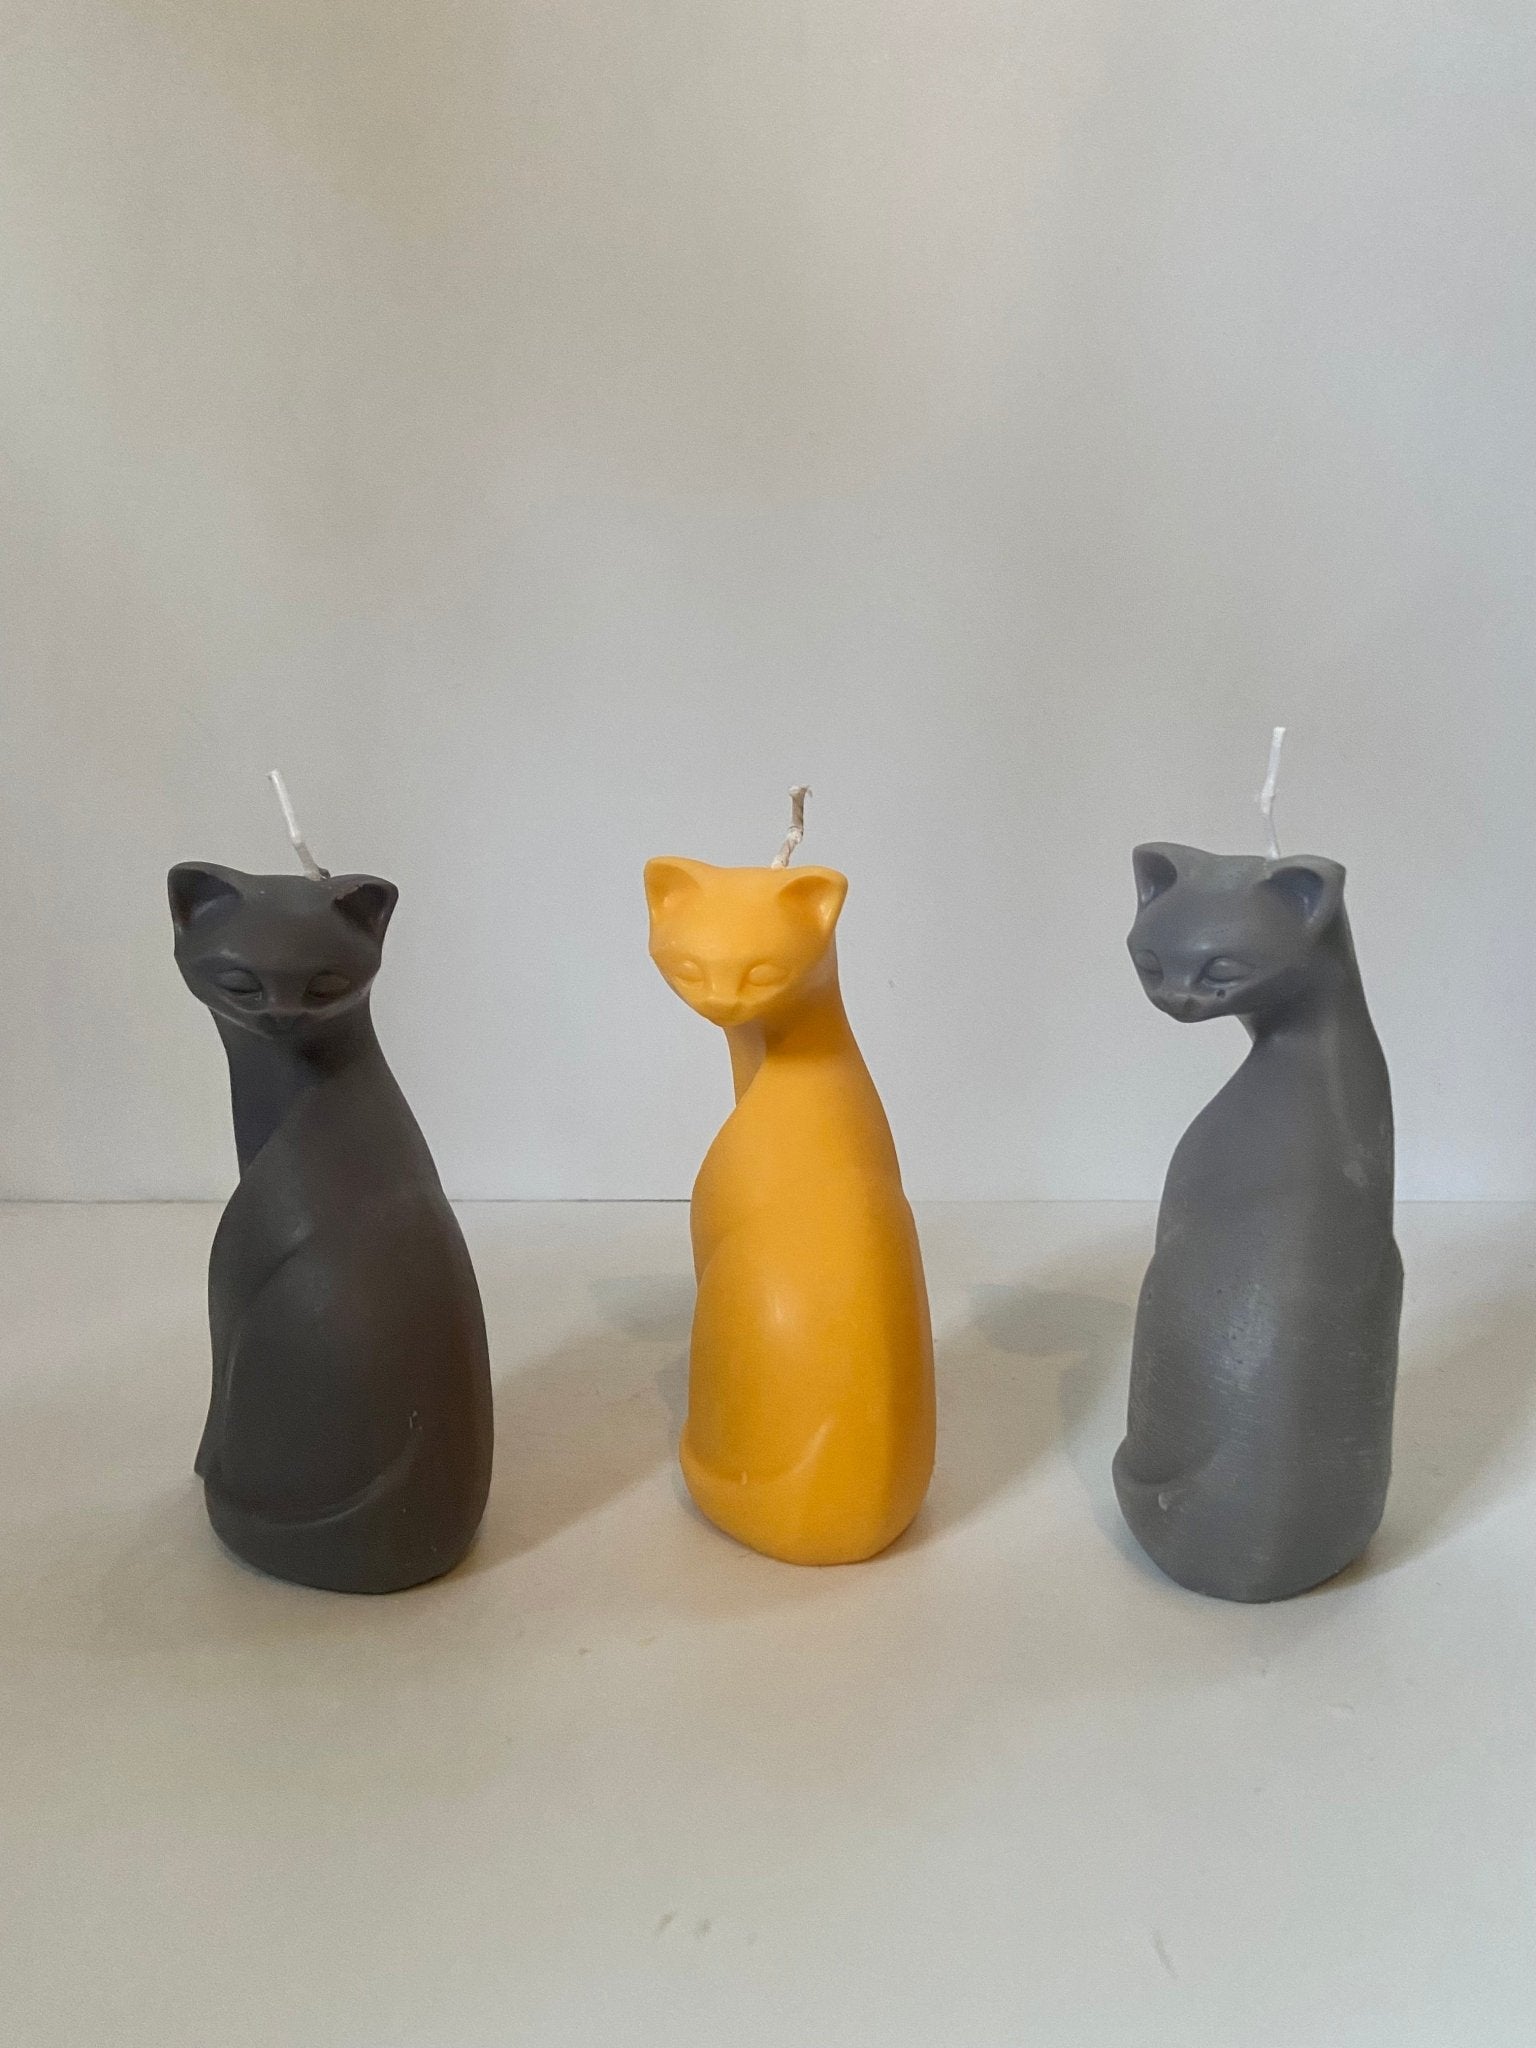 Cat candle - Kendall's Kandles